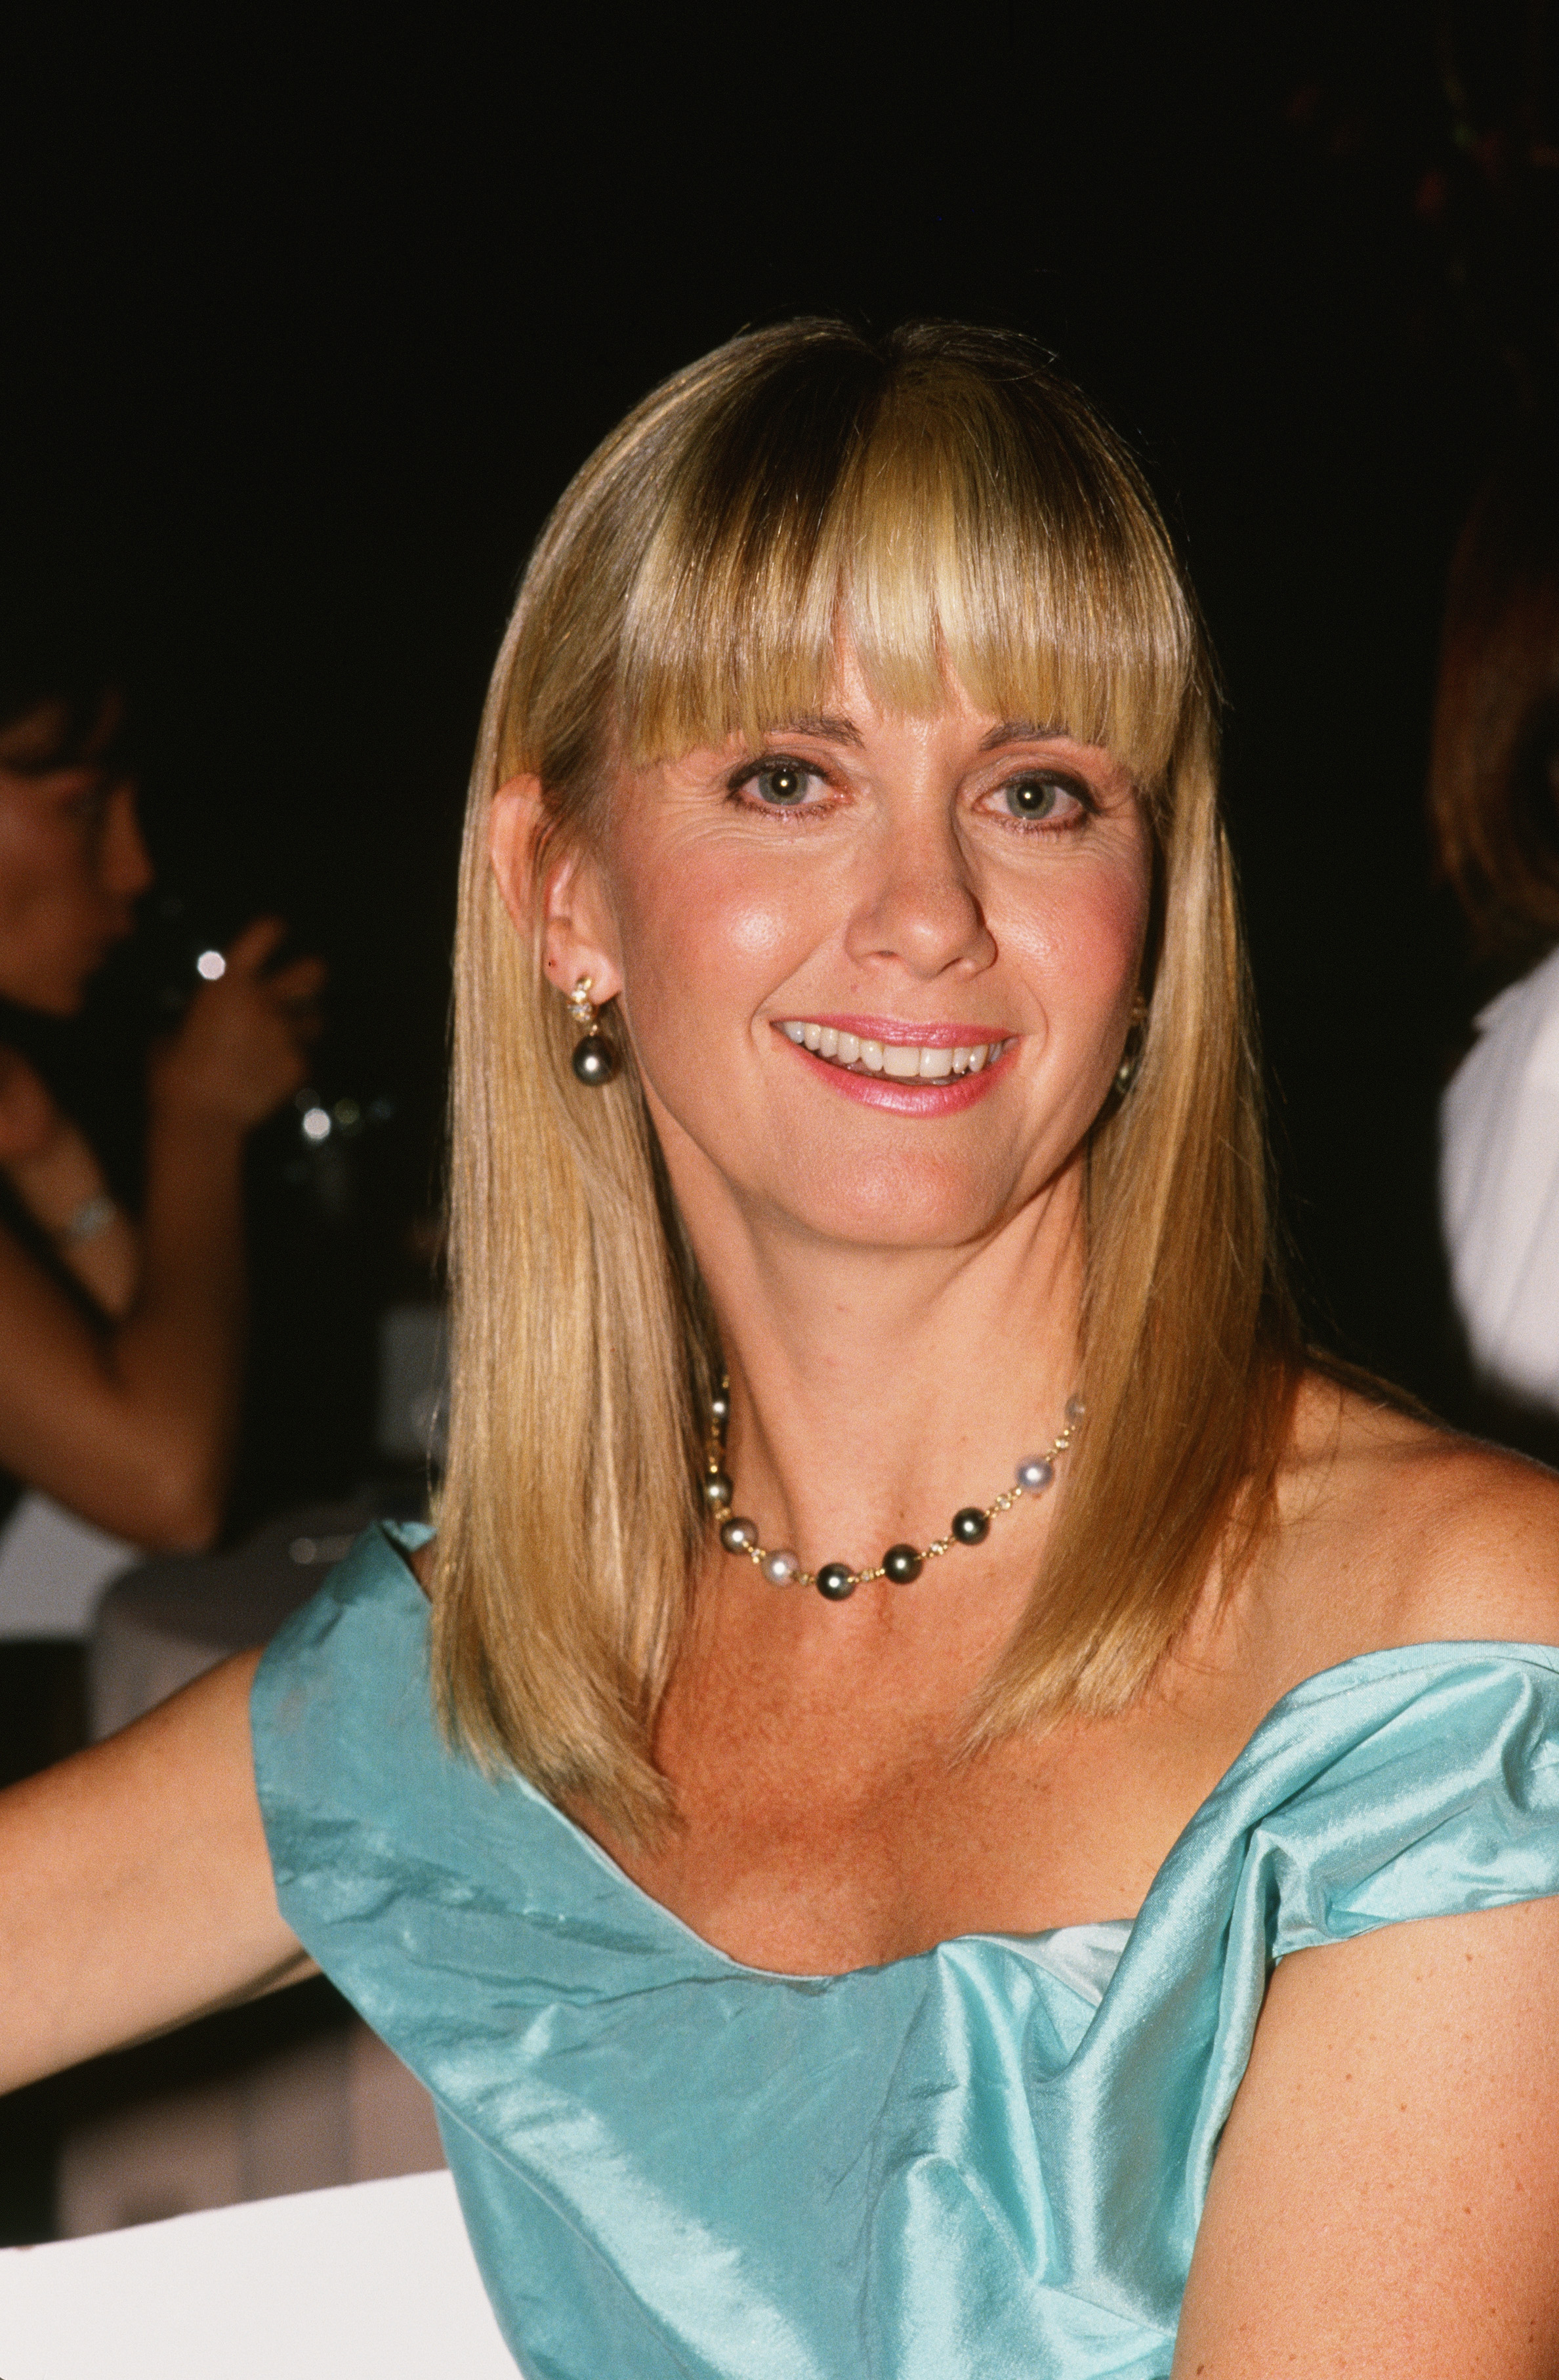 Olivia Newton-John poses at a children's benefit fundraiser in Los Angeles, California, in 1989. | Source: Getty Images